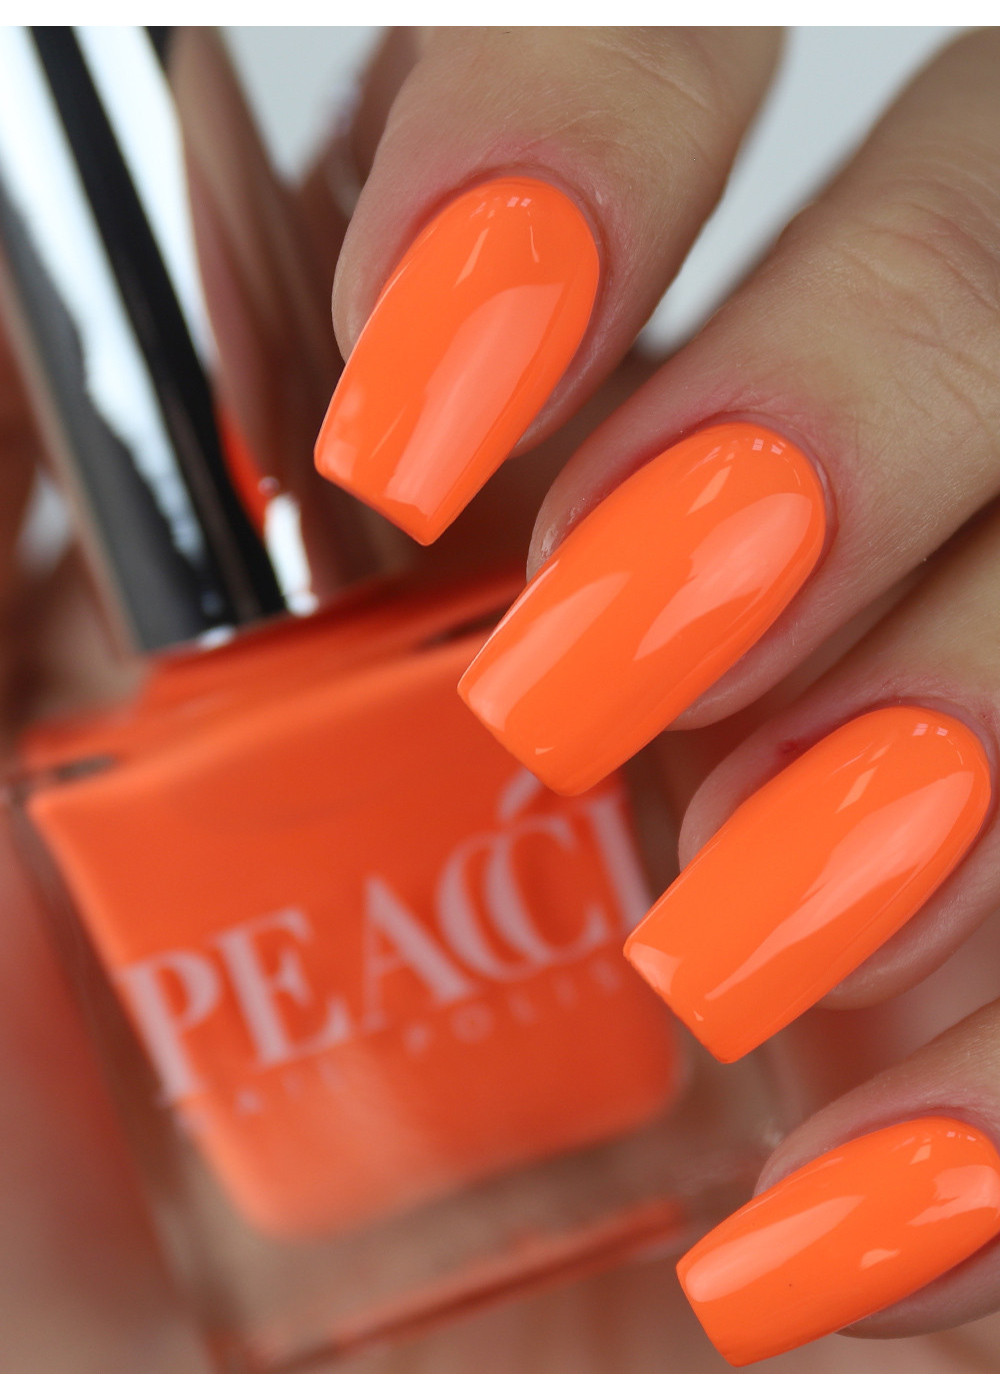 Indie Nails Peachy is Free of 12 toxins vegan cruelty-free quick dry glossy  finish chip resistant. Peach Colour shade Nail polish, enamel, lacquer,  paint Liquid: 5 ml